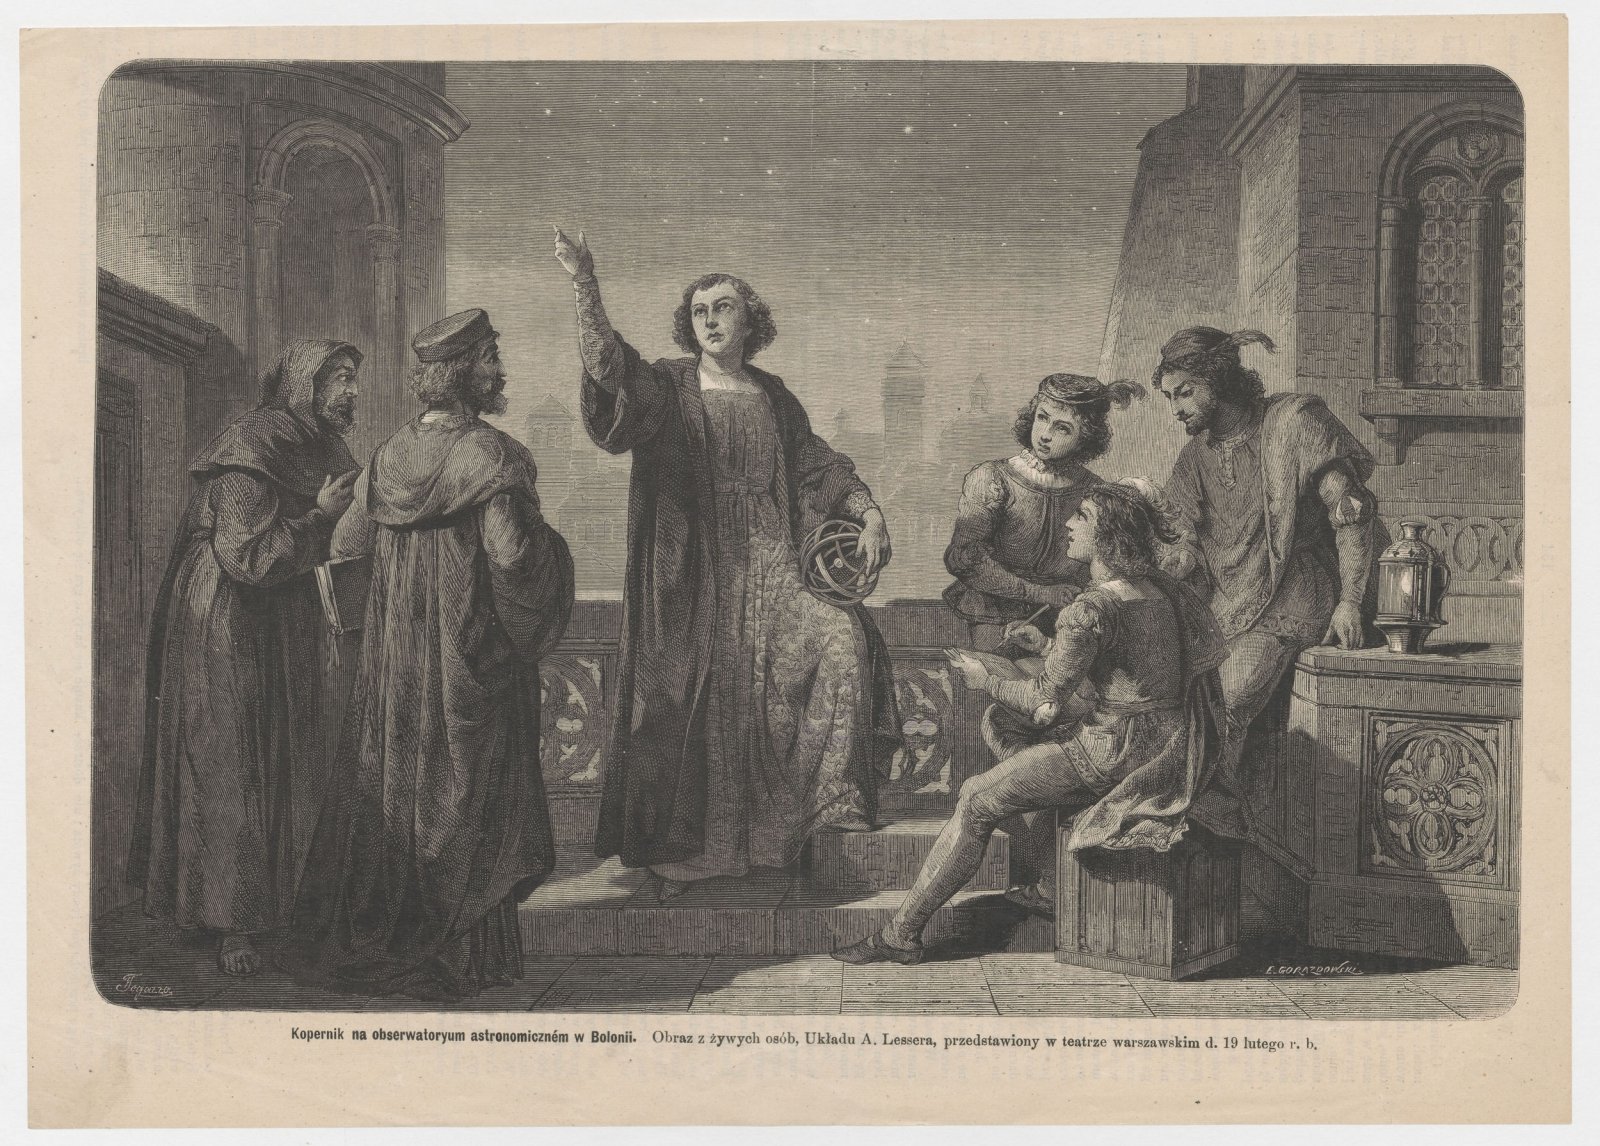 Tableau vivant showing Copernicus in a Bologna observatory. Performed in a Warsaw theatre in 1873.